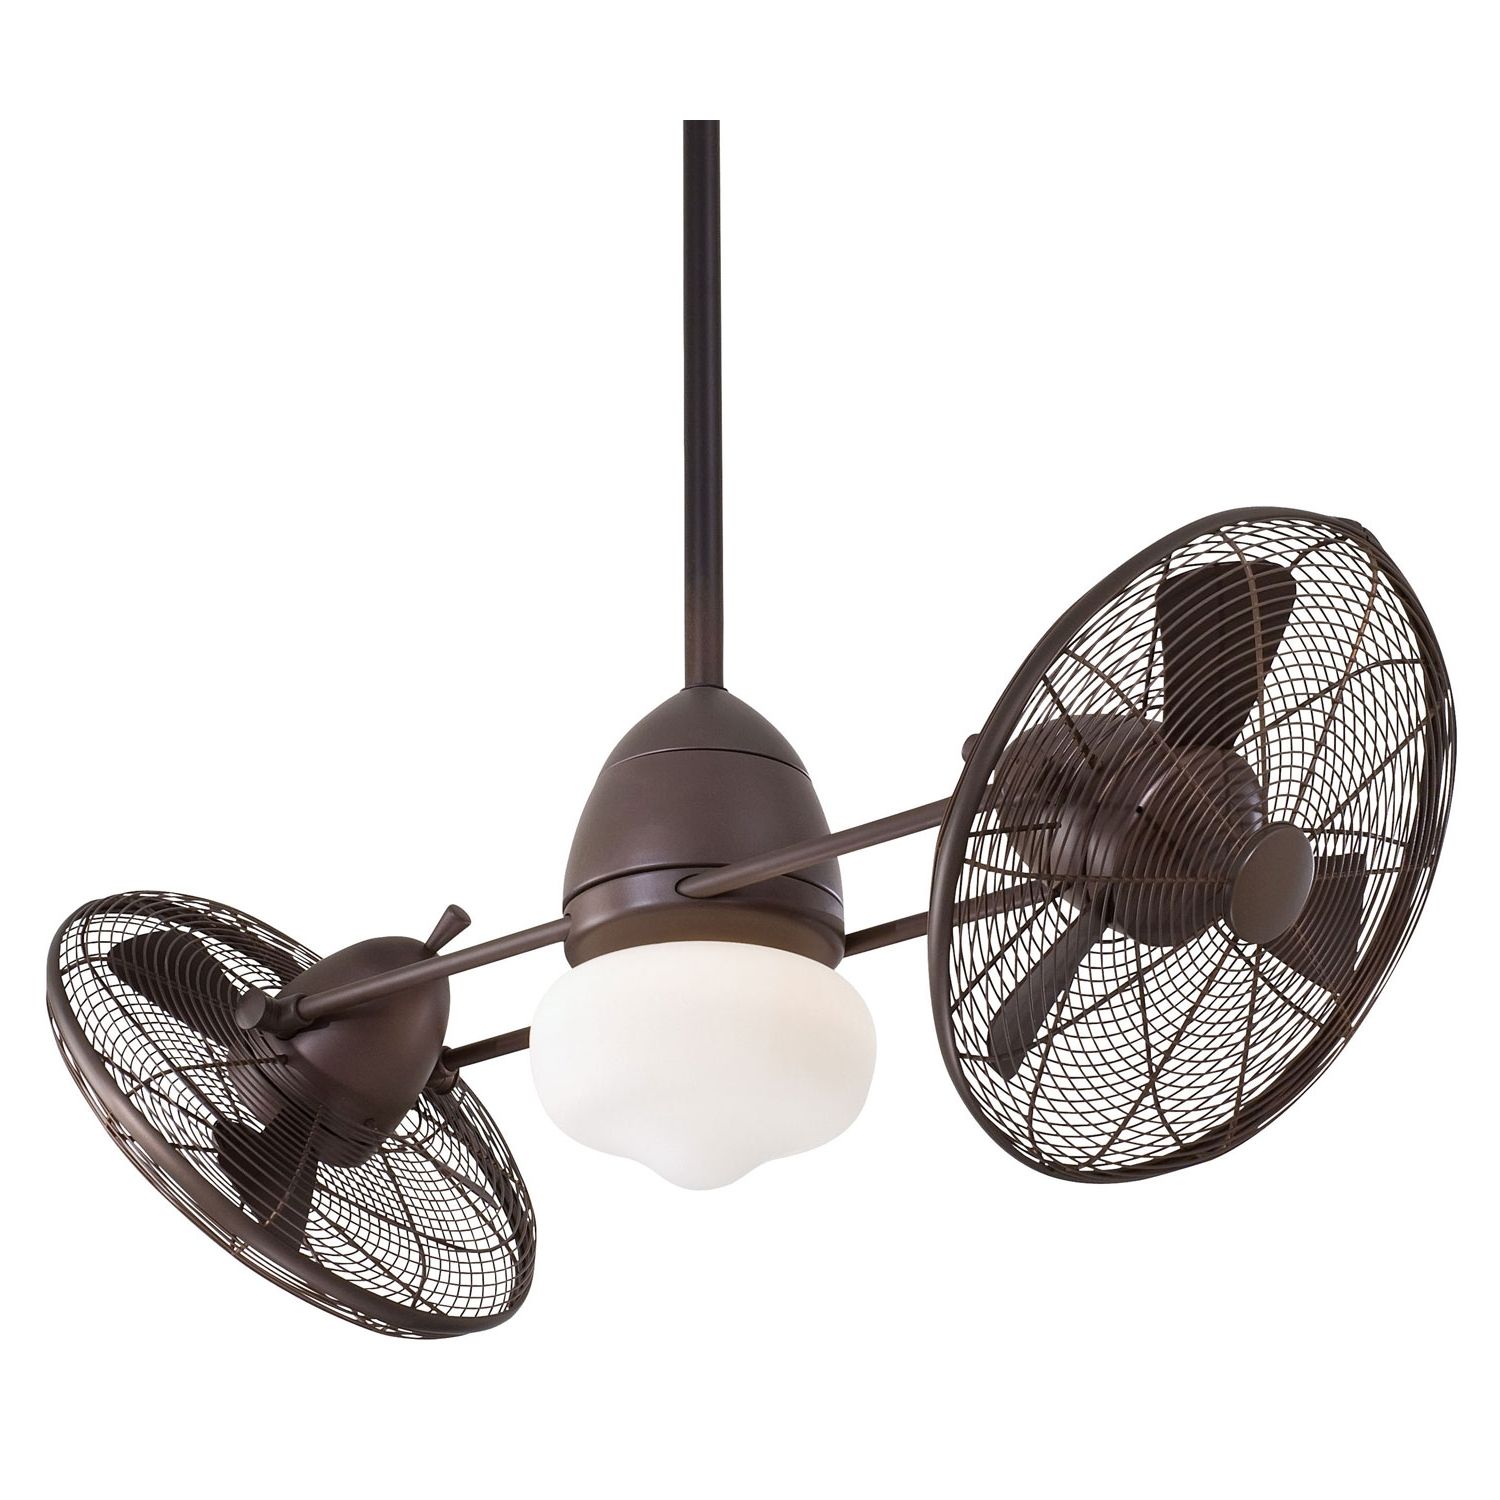 Bronze Outdoor Ceiling Fans Throughout Well Known Minka Aire 42 Inch Gyro Wet Indoor/outdoor Oil Rubbed Bronze Ceiling (View 9 of 20)